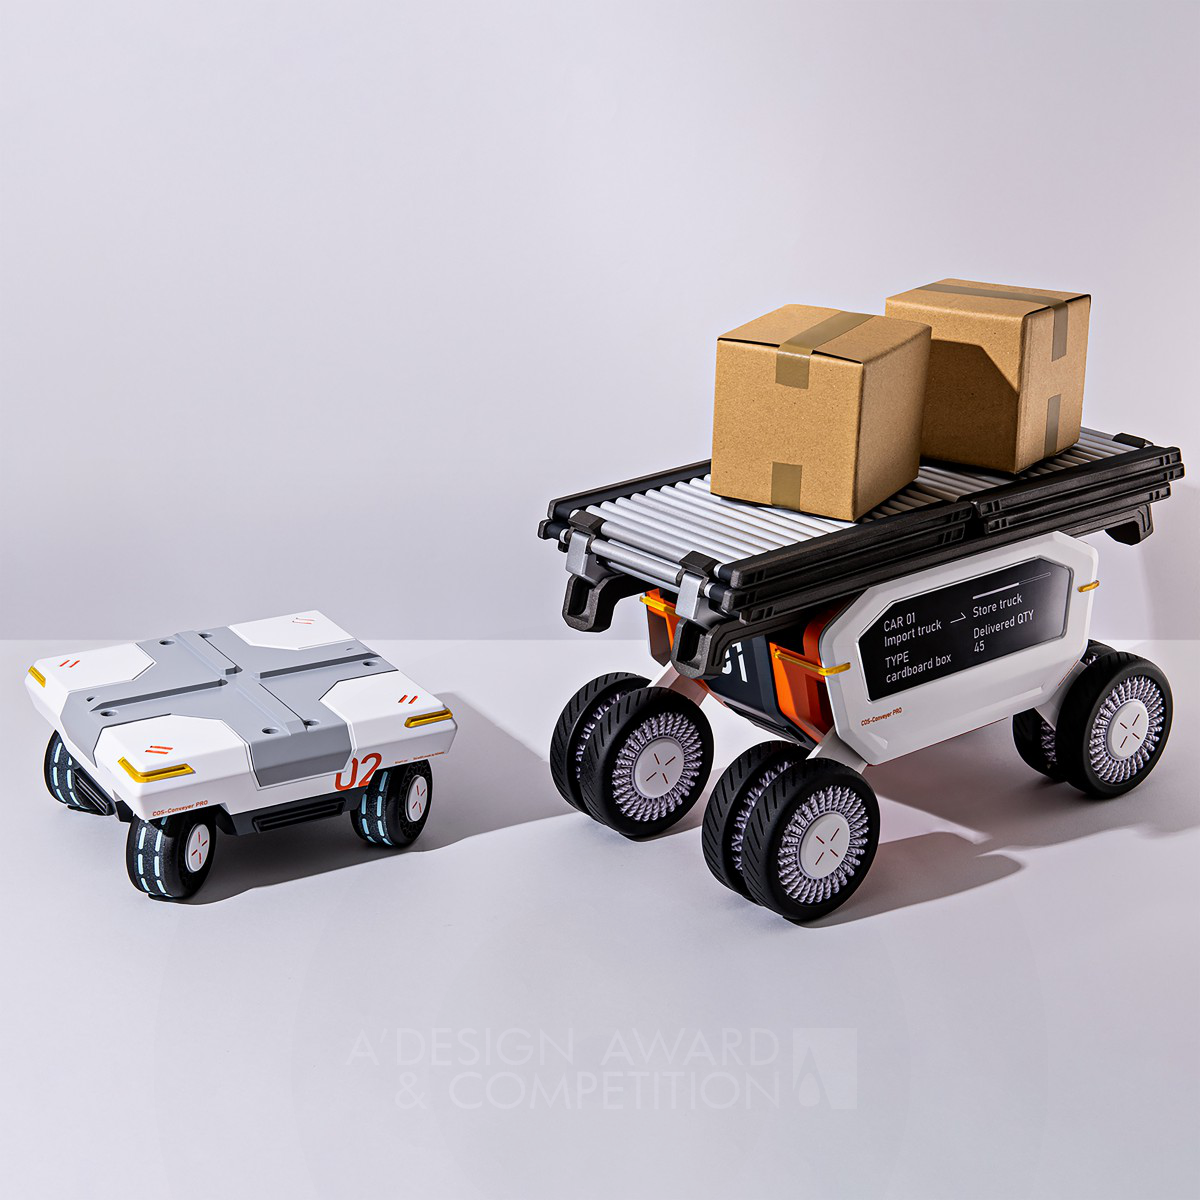 Cos Conveyer Pro Transport Goods Vehicle by Chien Yu-Chieh